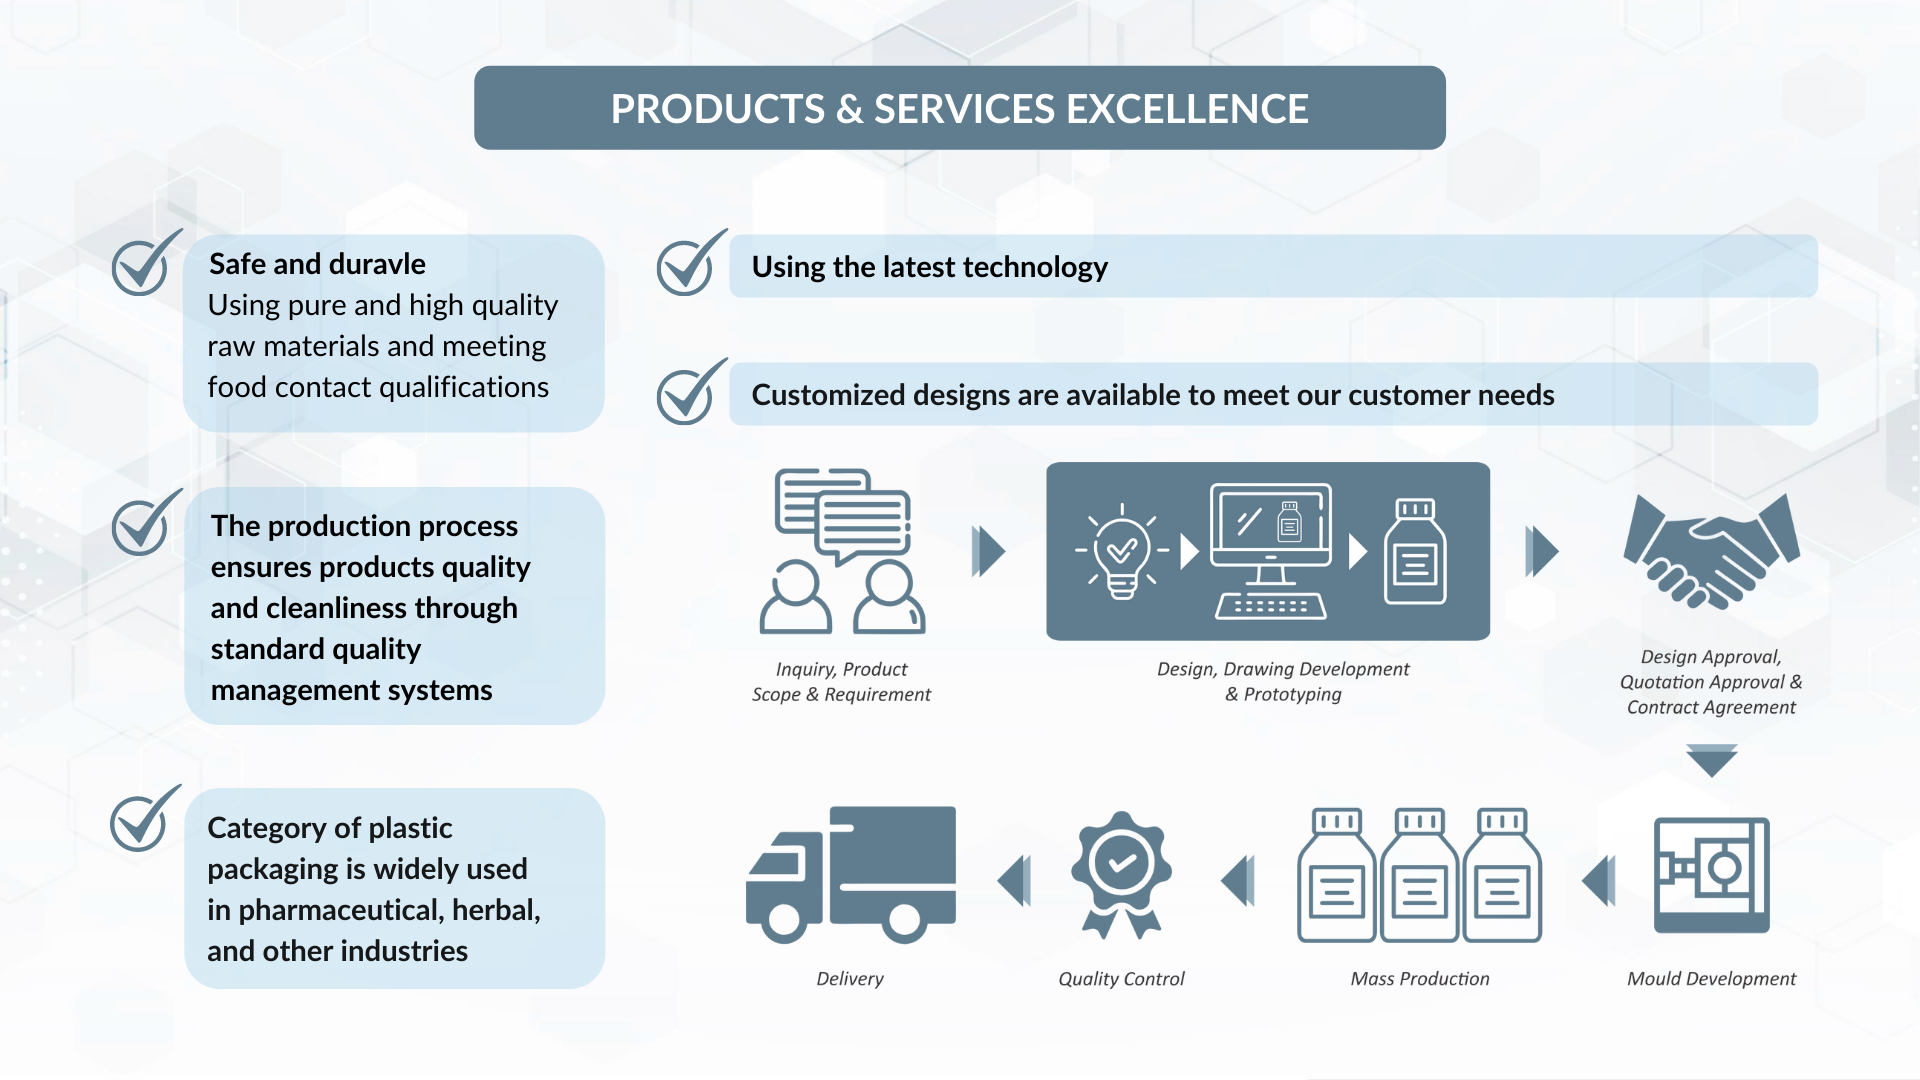 Product & Services Excellence